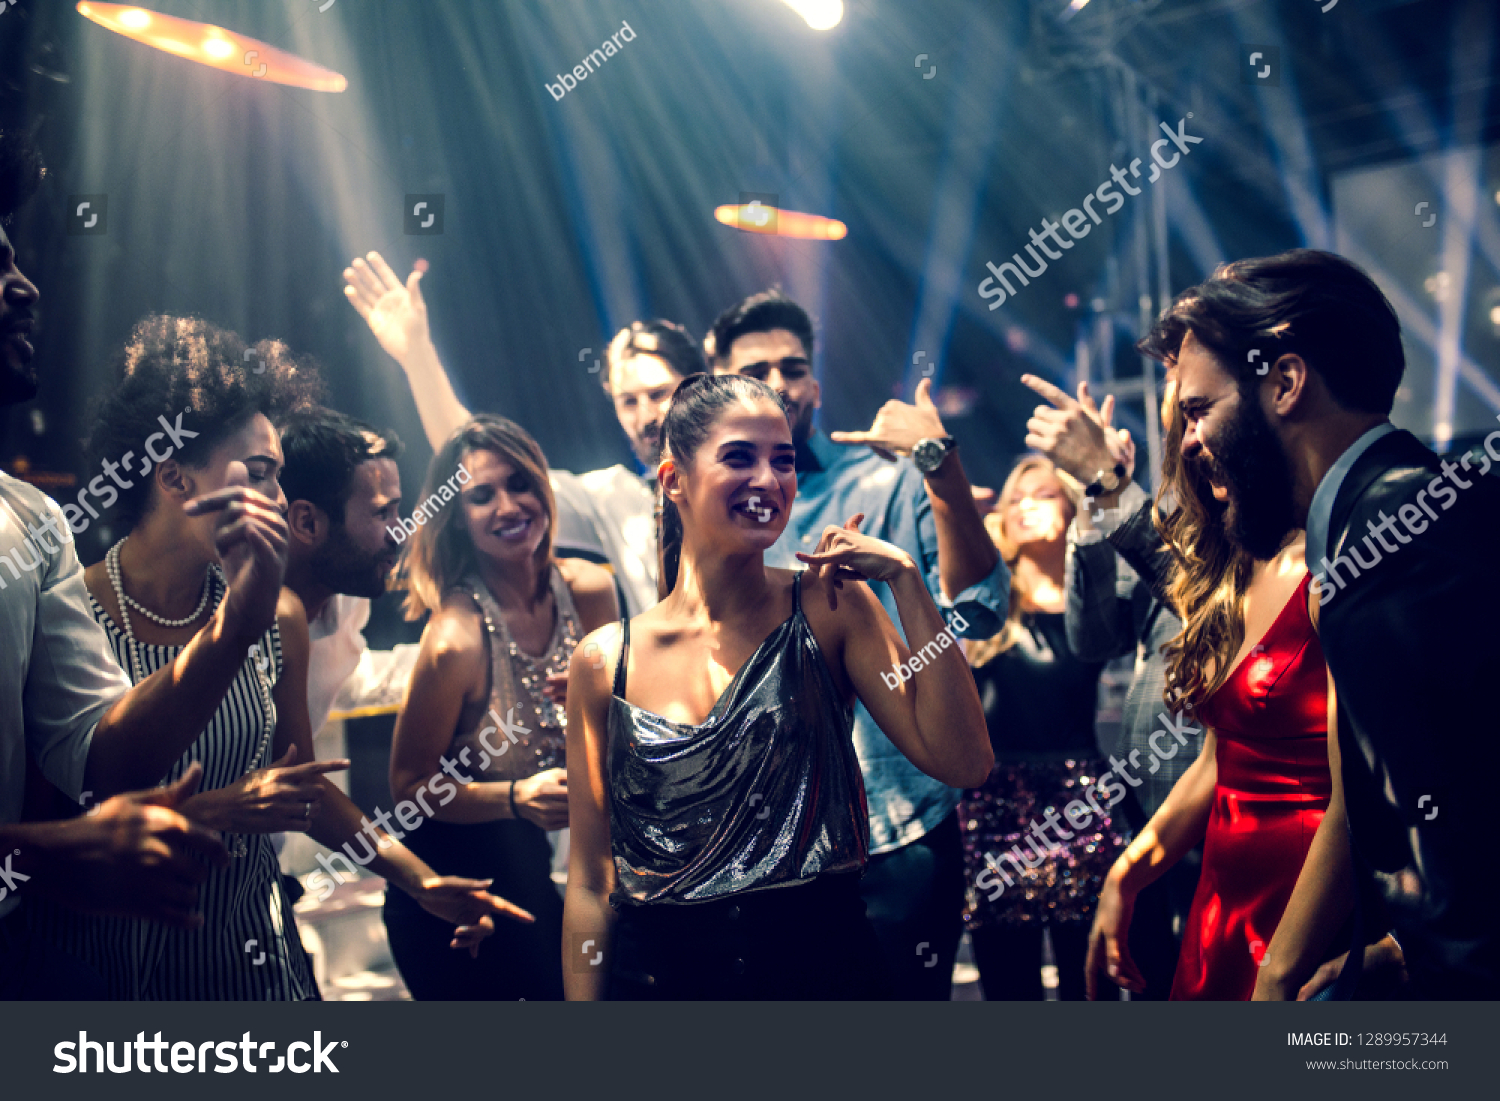 Group of people dancing in the club #1289957344